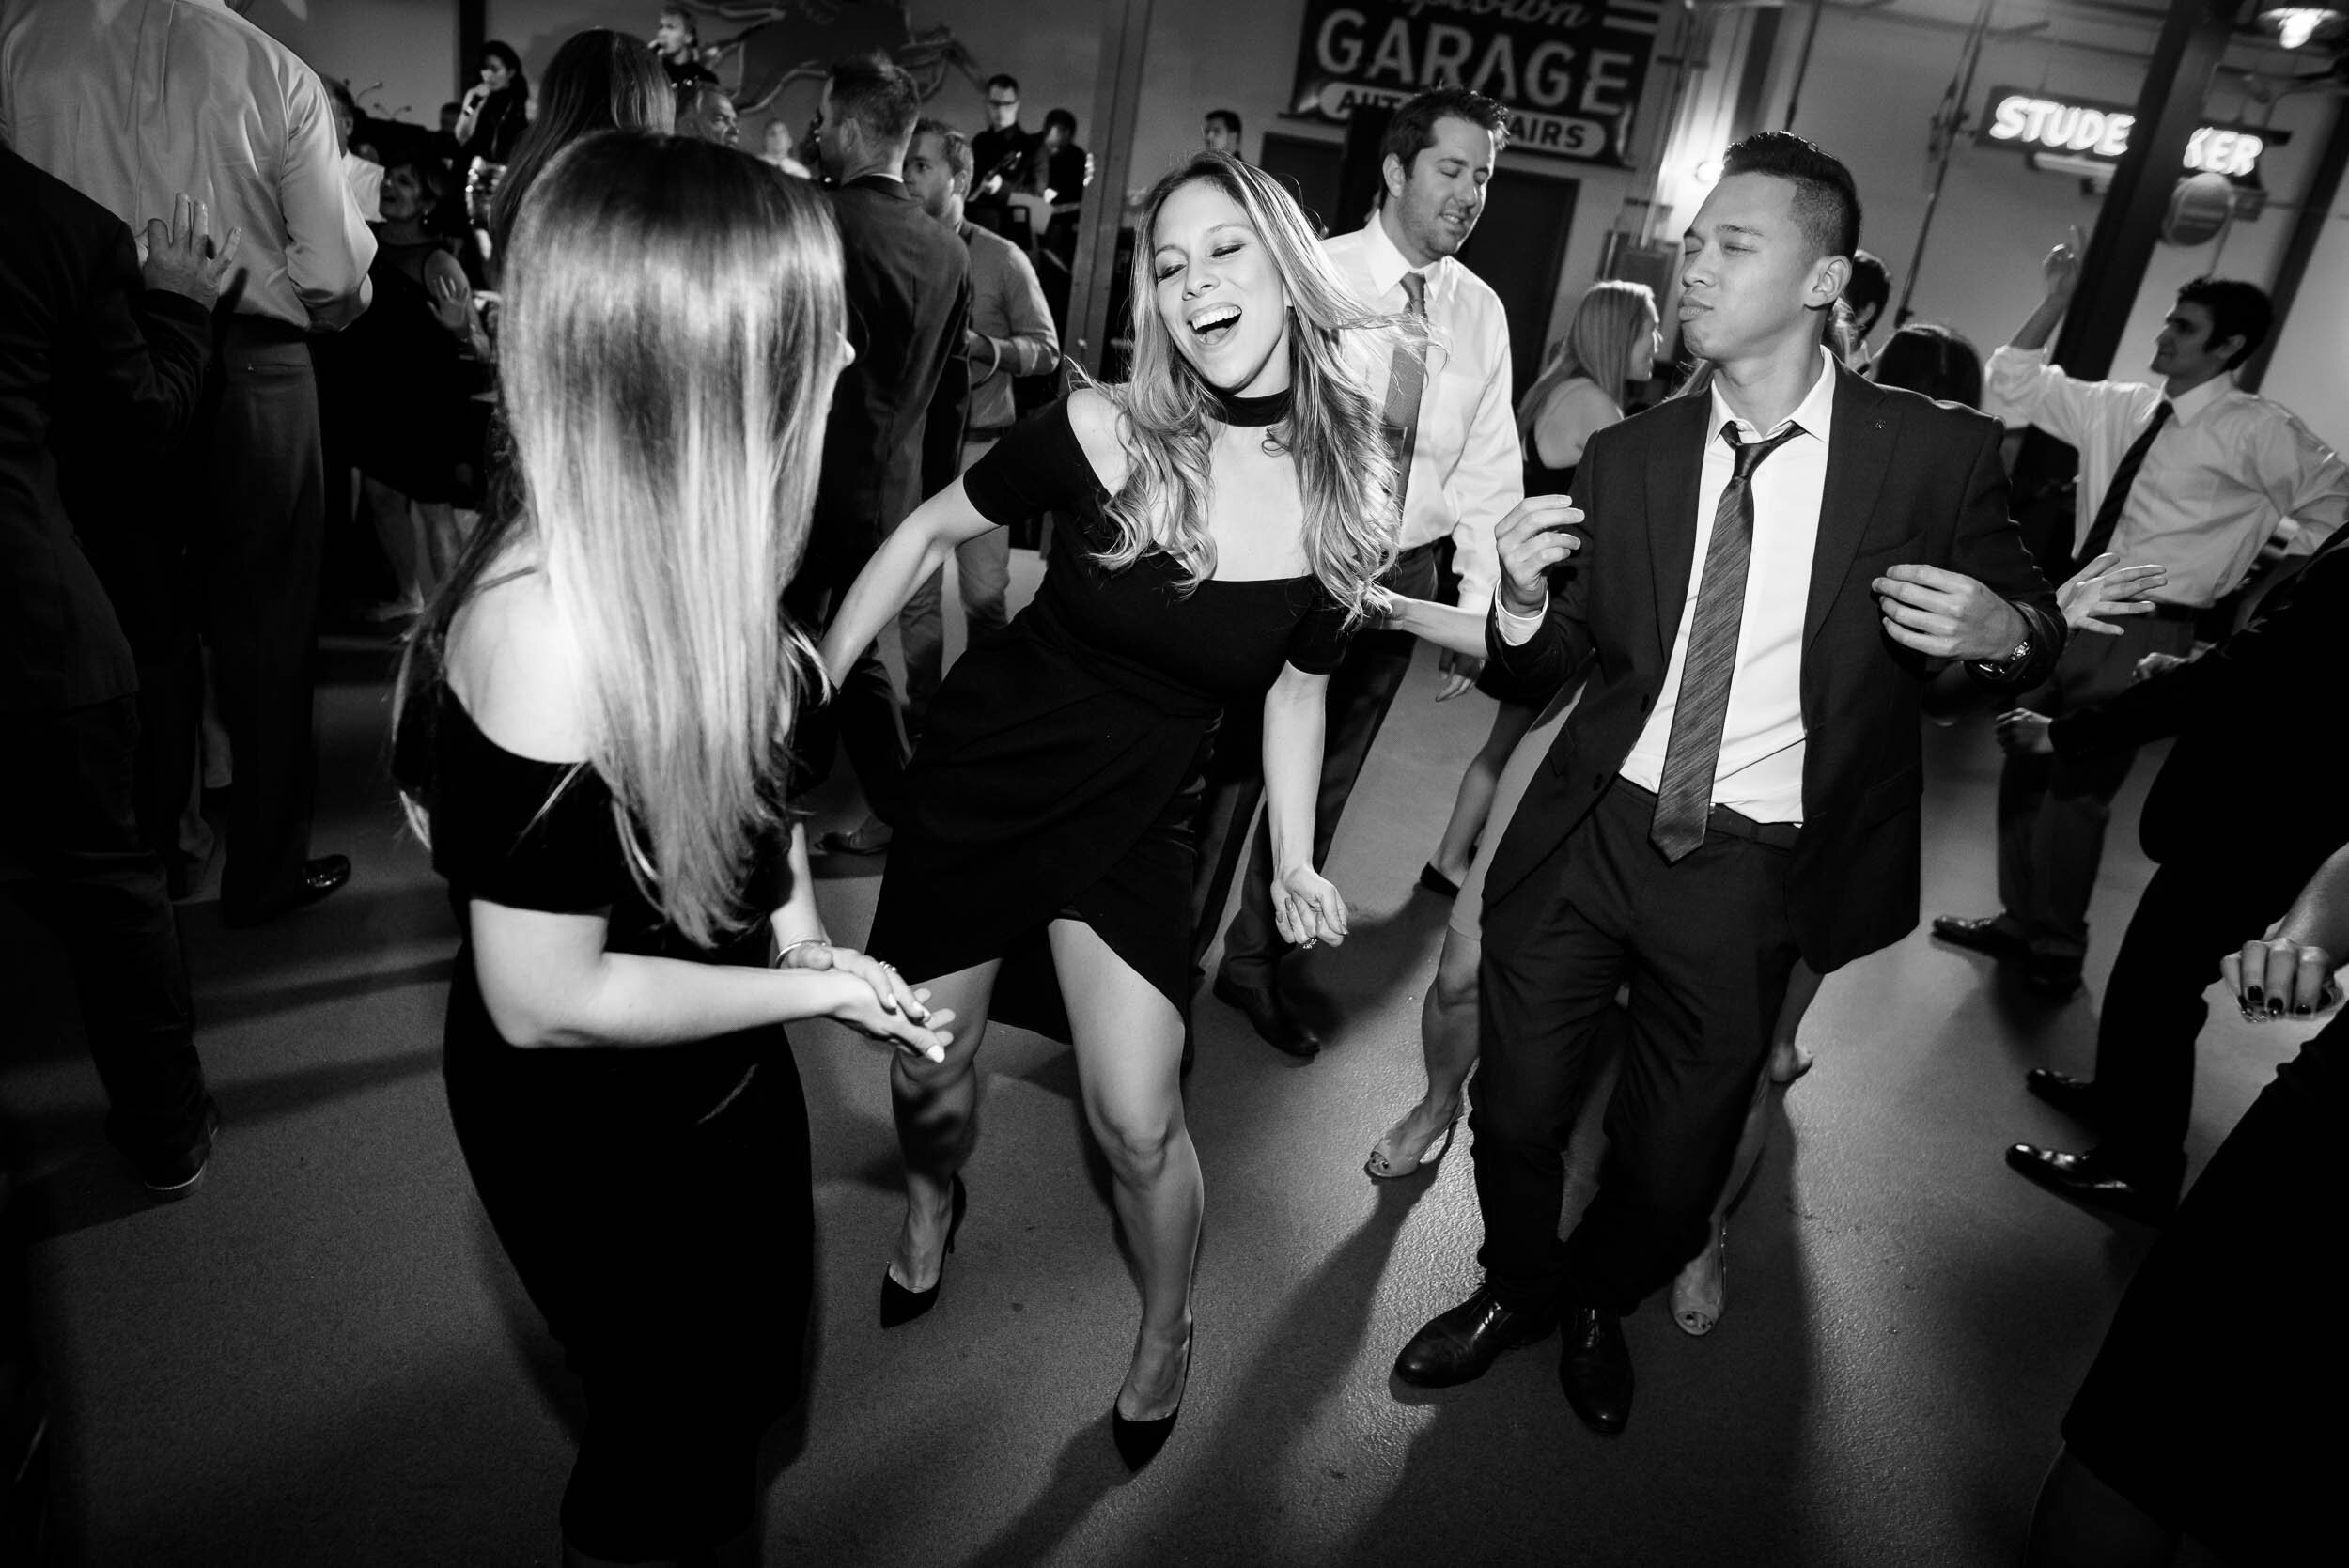 Fun dance floor moment during the wedding reception: Ravenswood Event Center Chicago wedding captured by J. Brown Photography.  